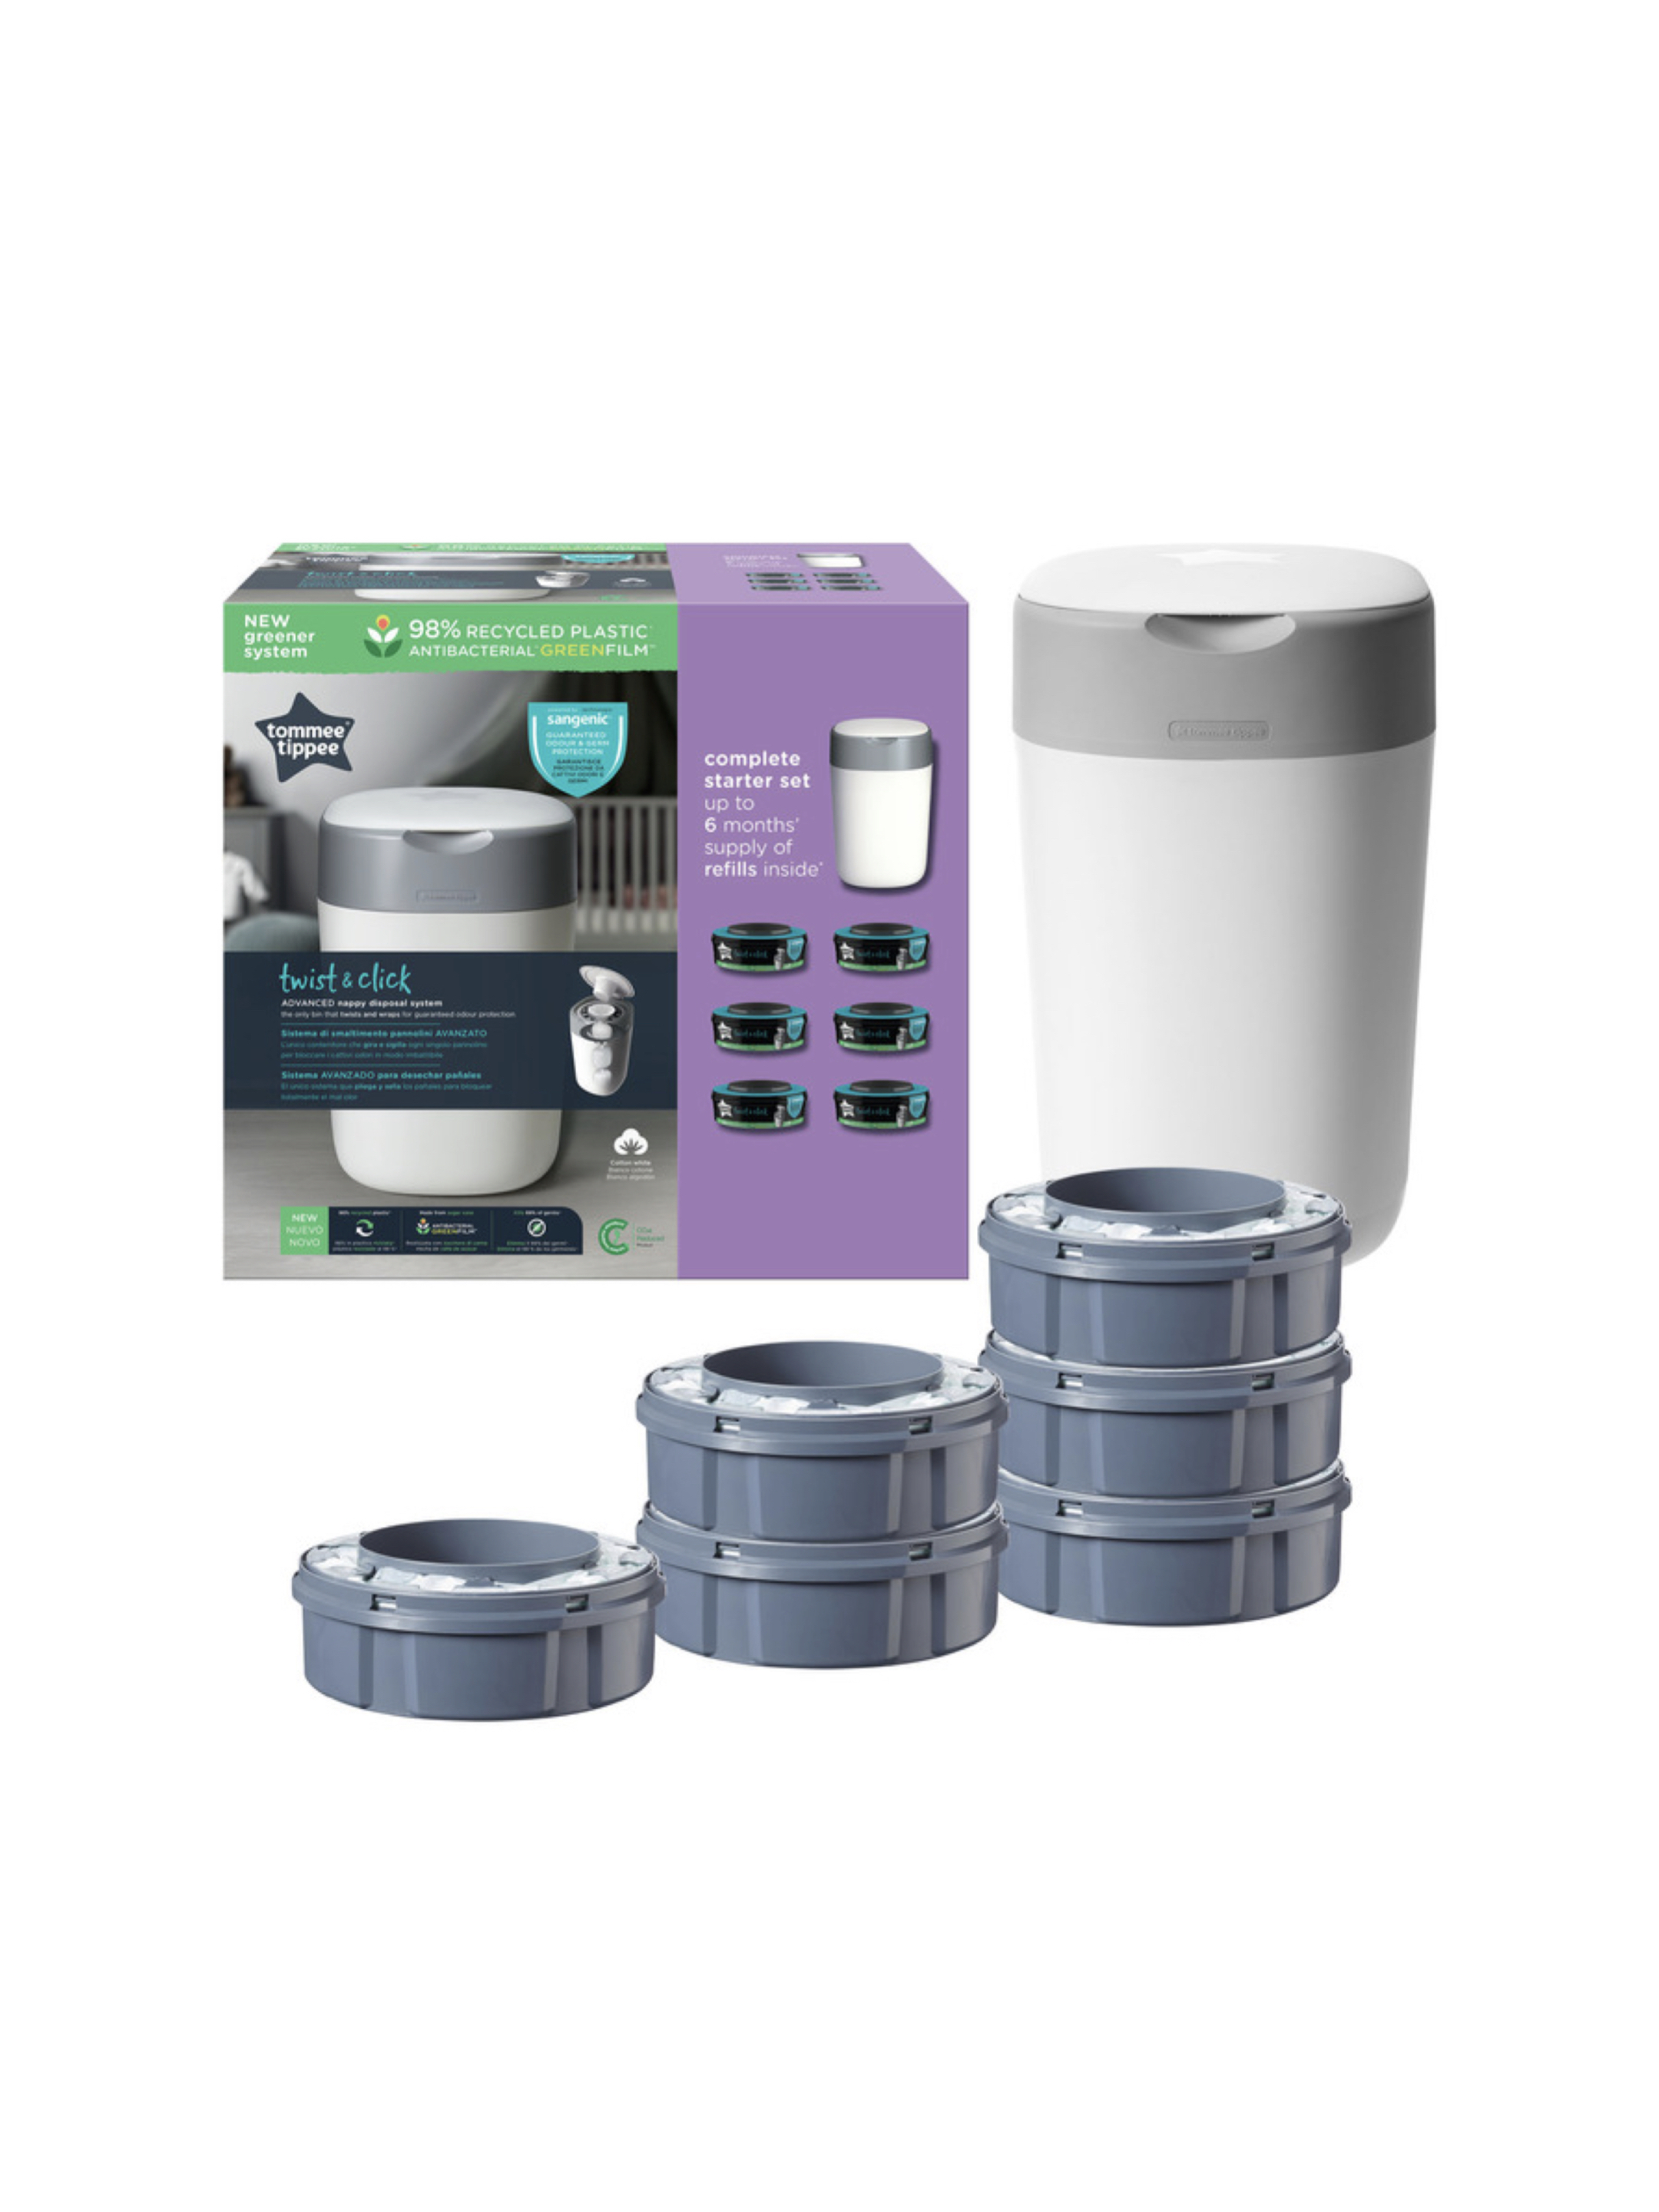 TOMMEE TIPPEE SINGLE Recambios Multipack x6 Sangenic